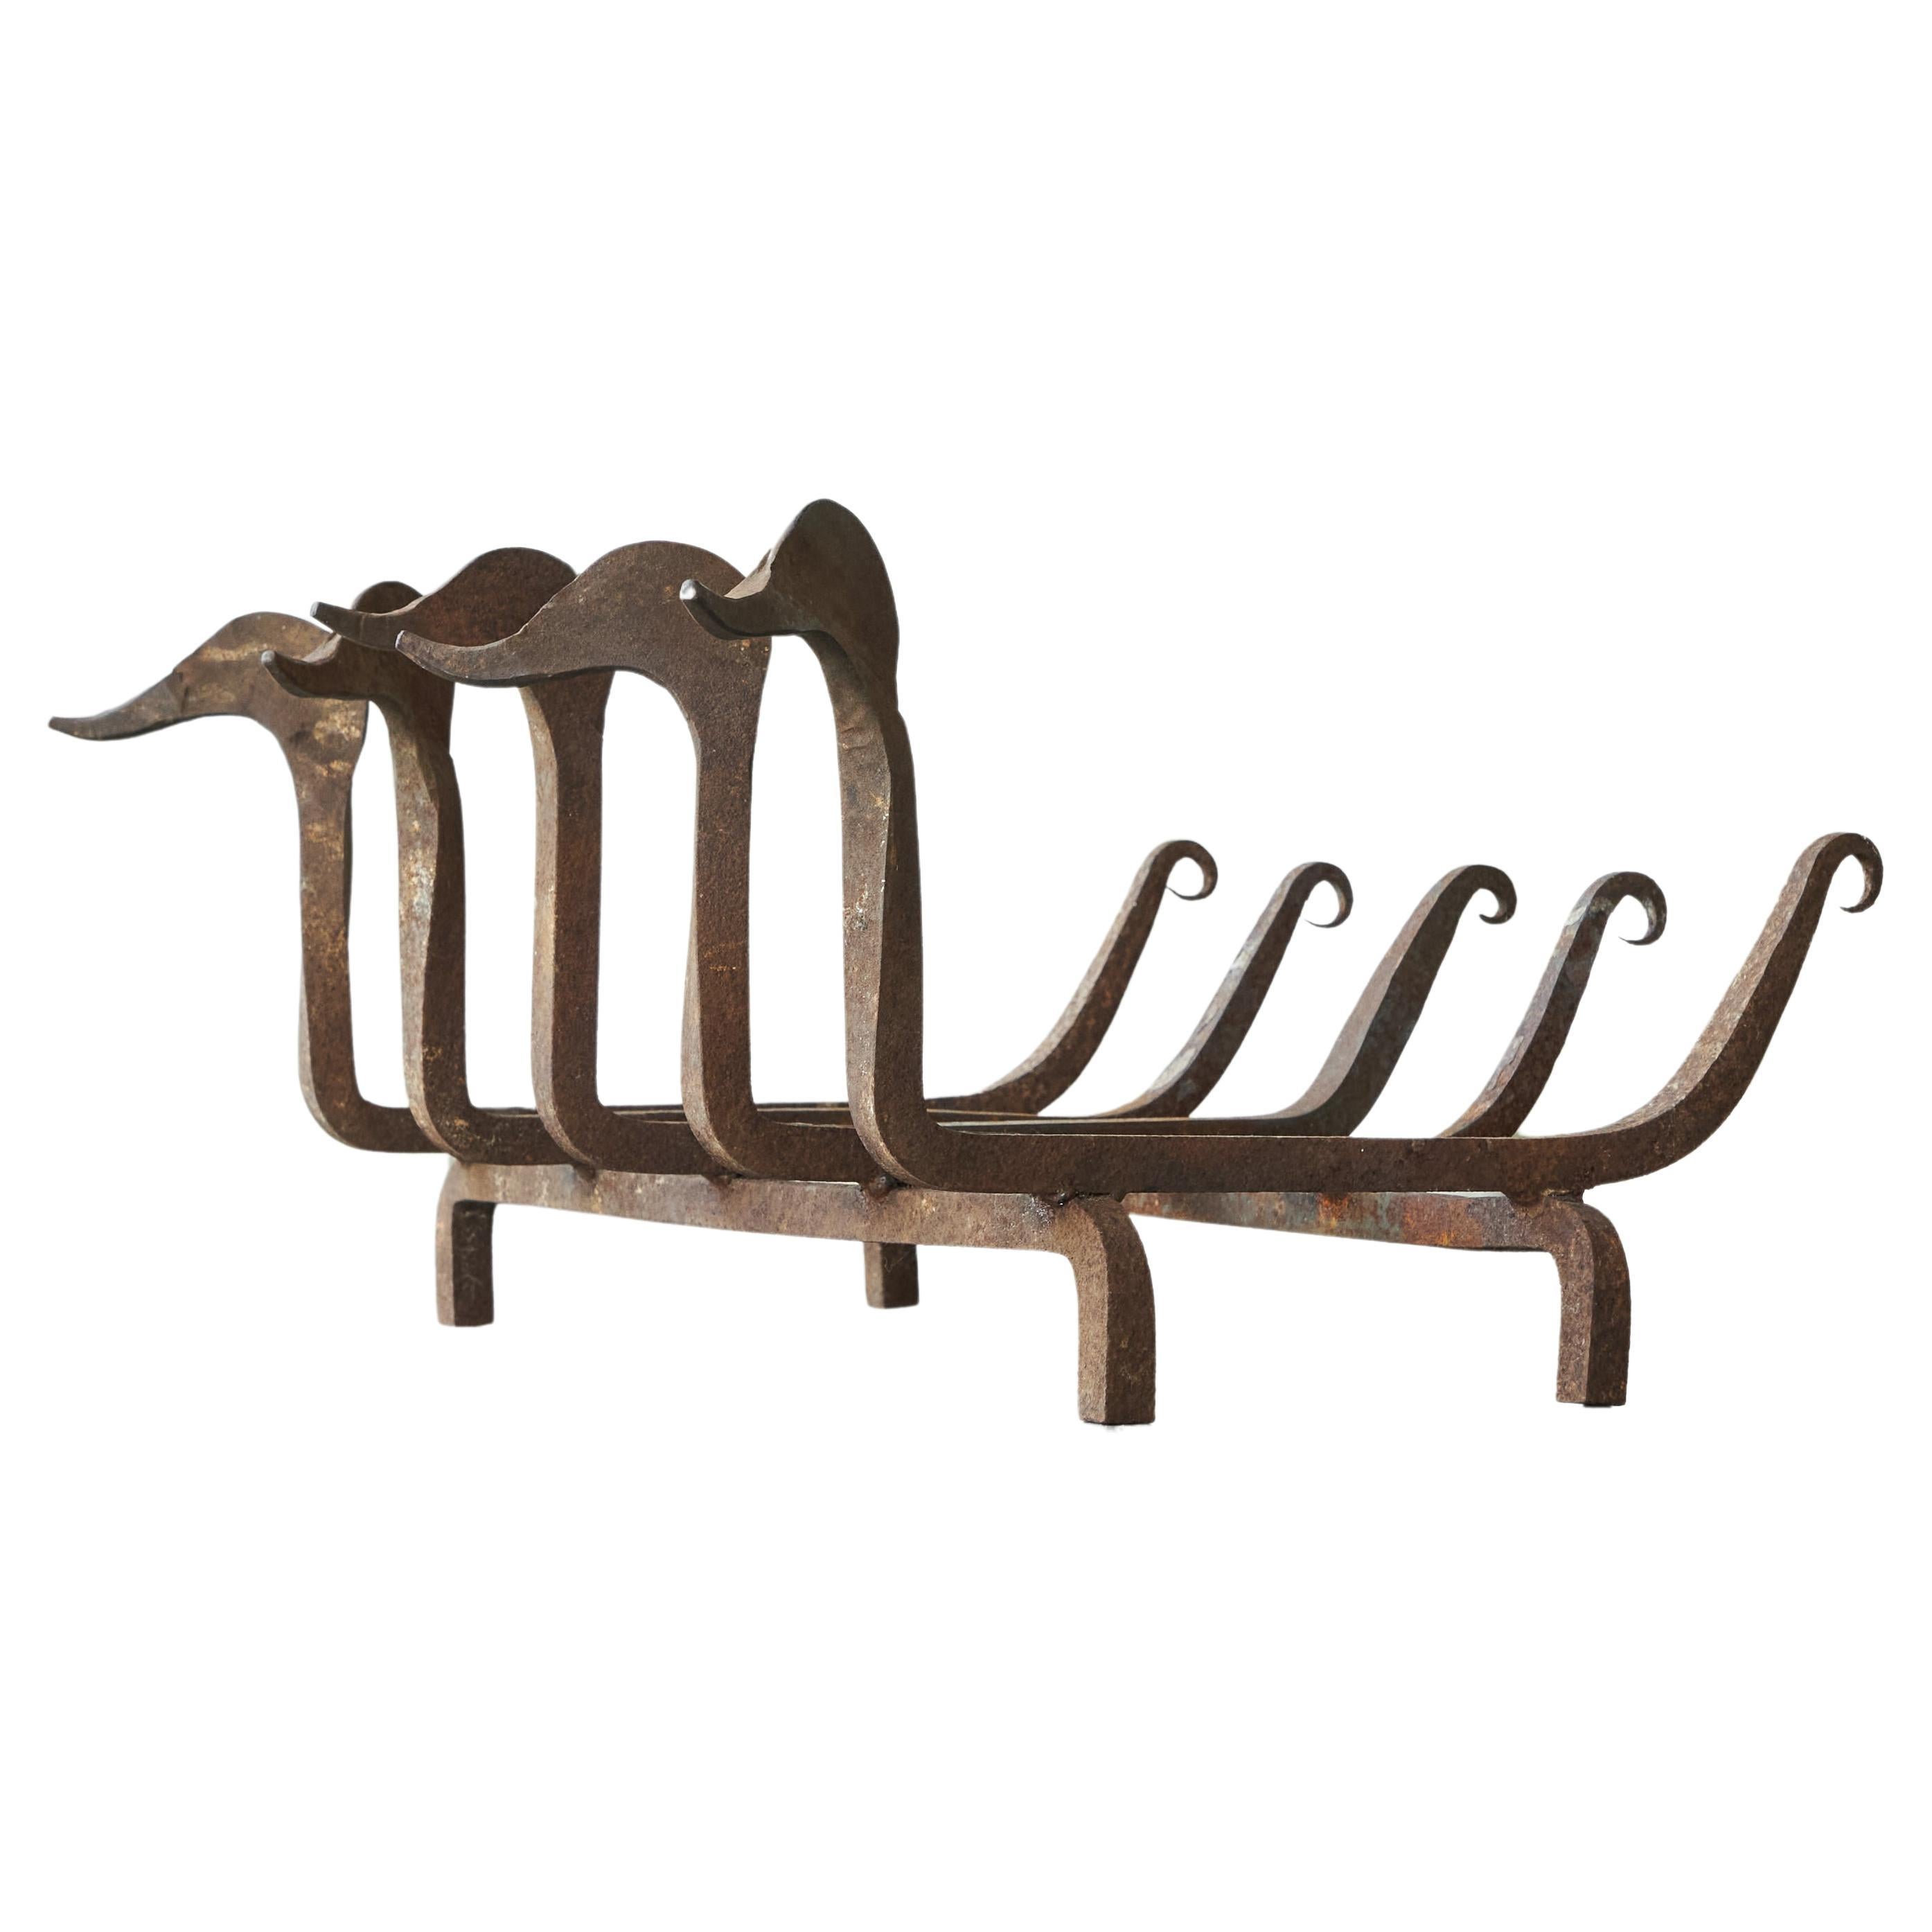 Whimsical Antique Duck Shaped Fire Grate / Andirons in Rusted Wrought Iron